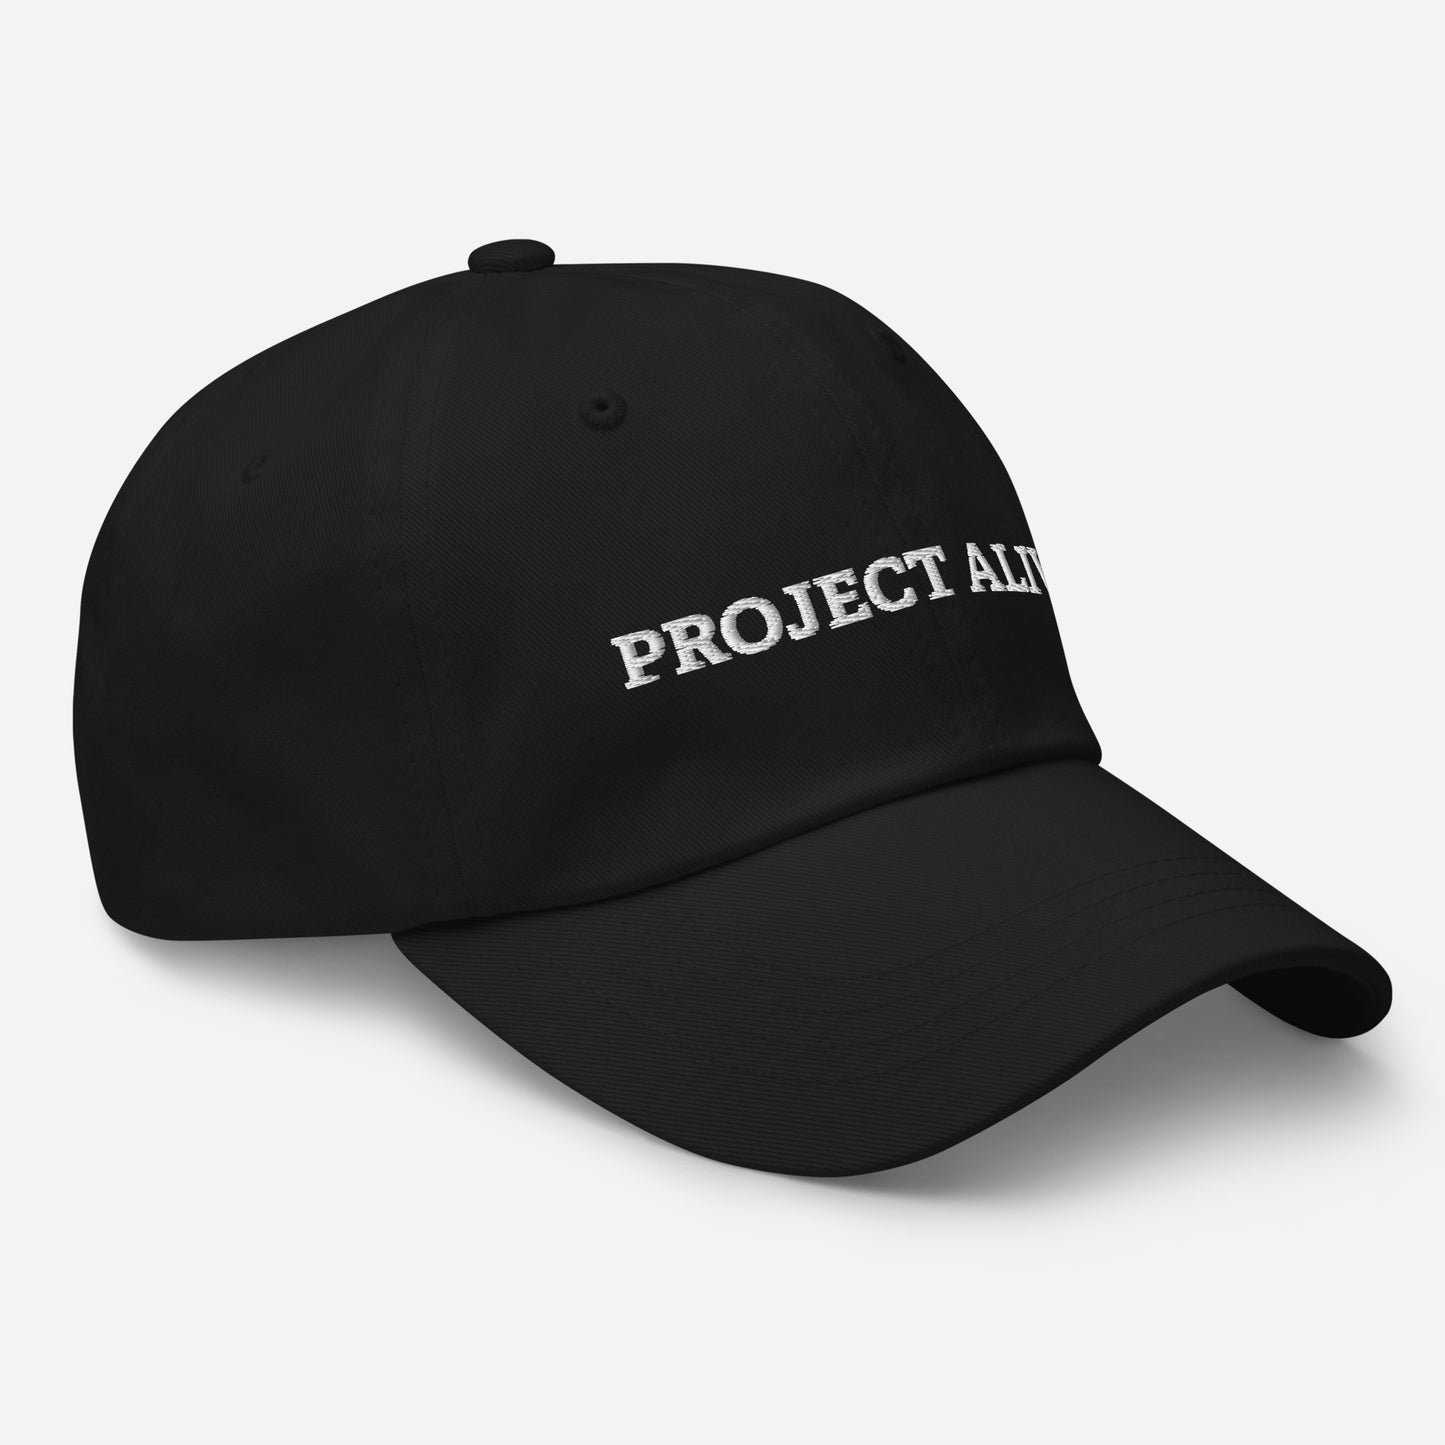 Project Alive Hat